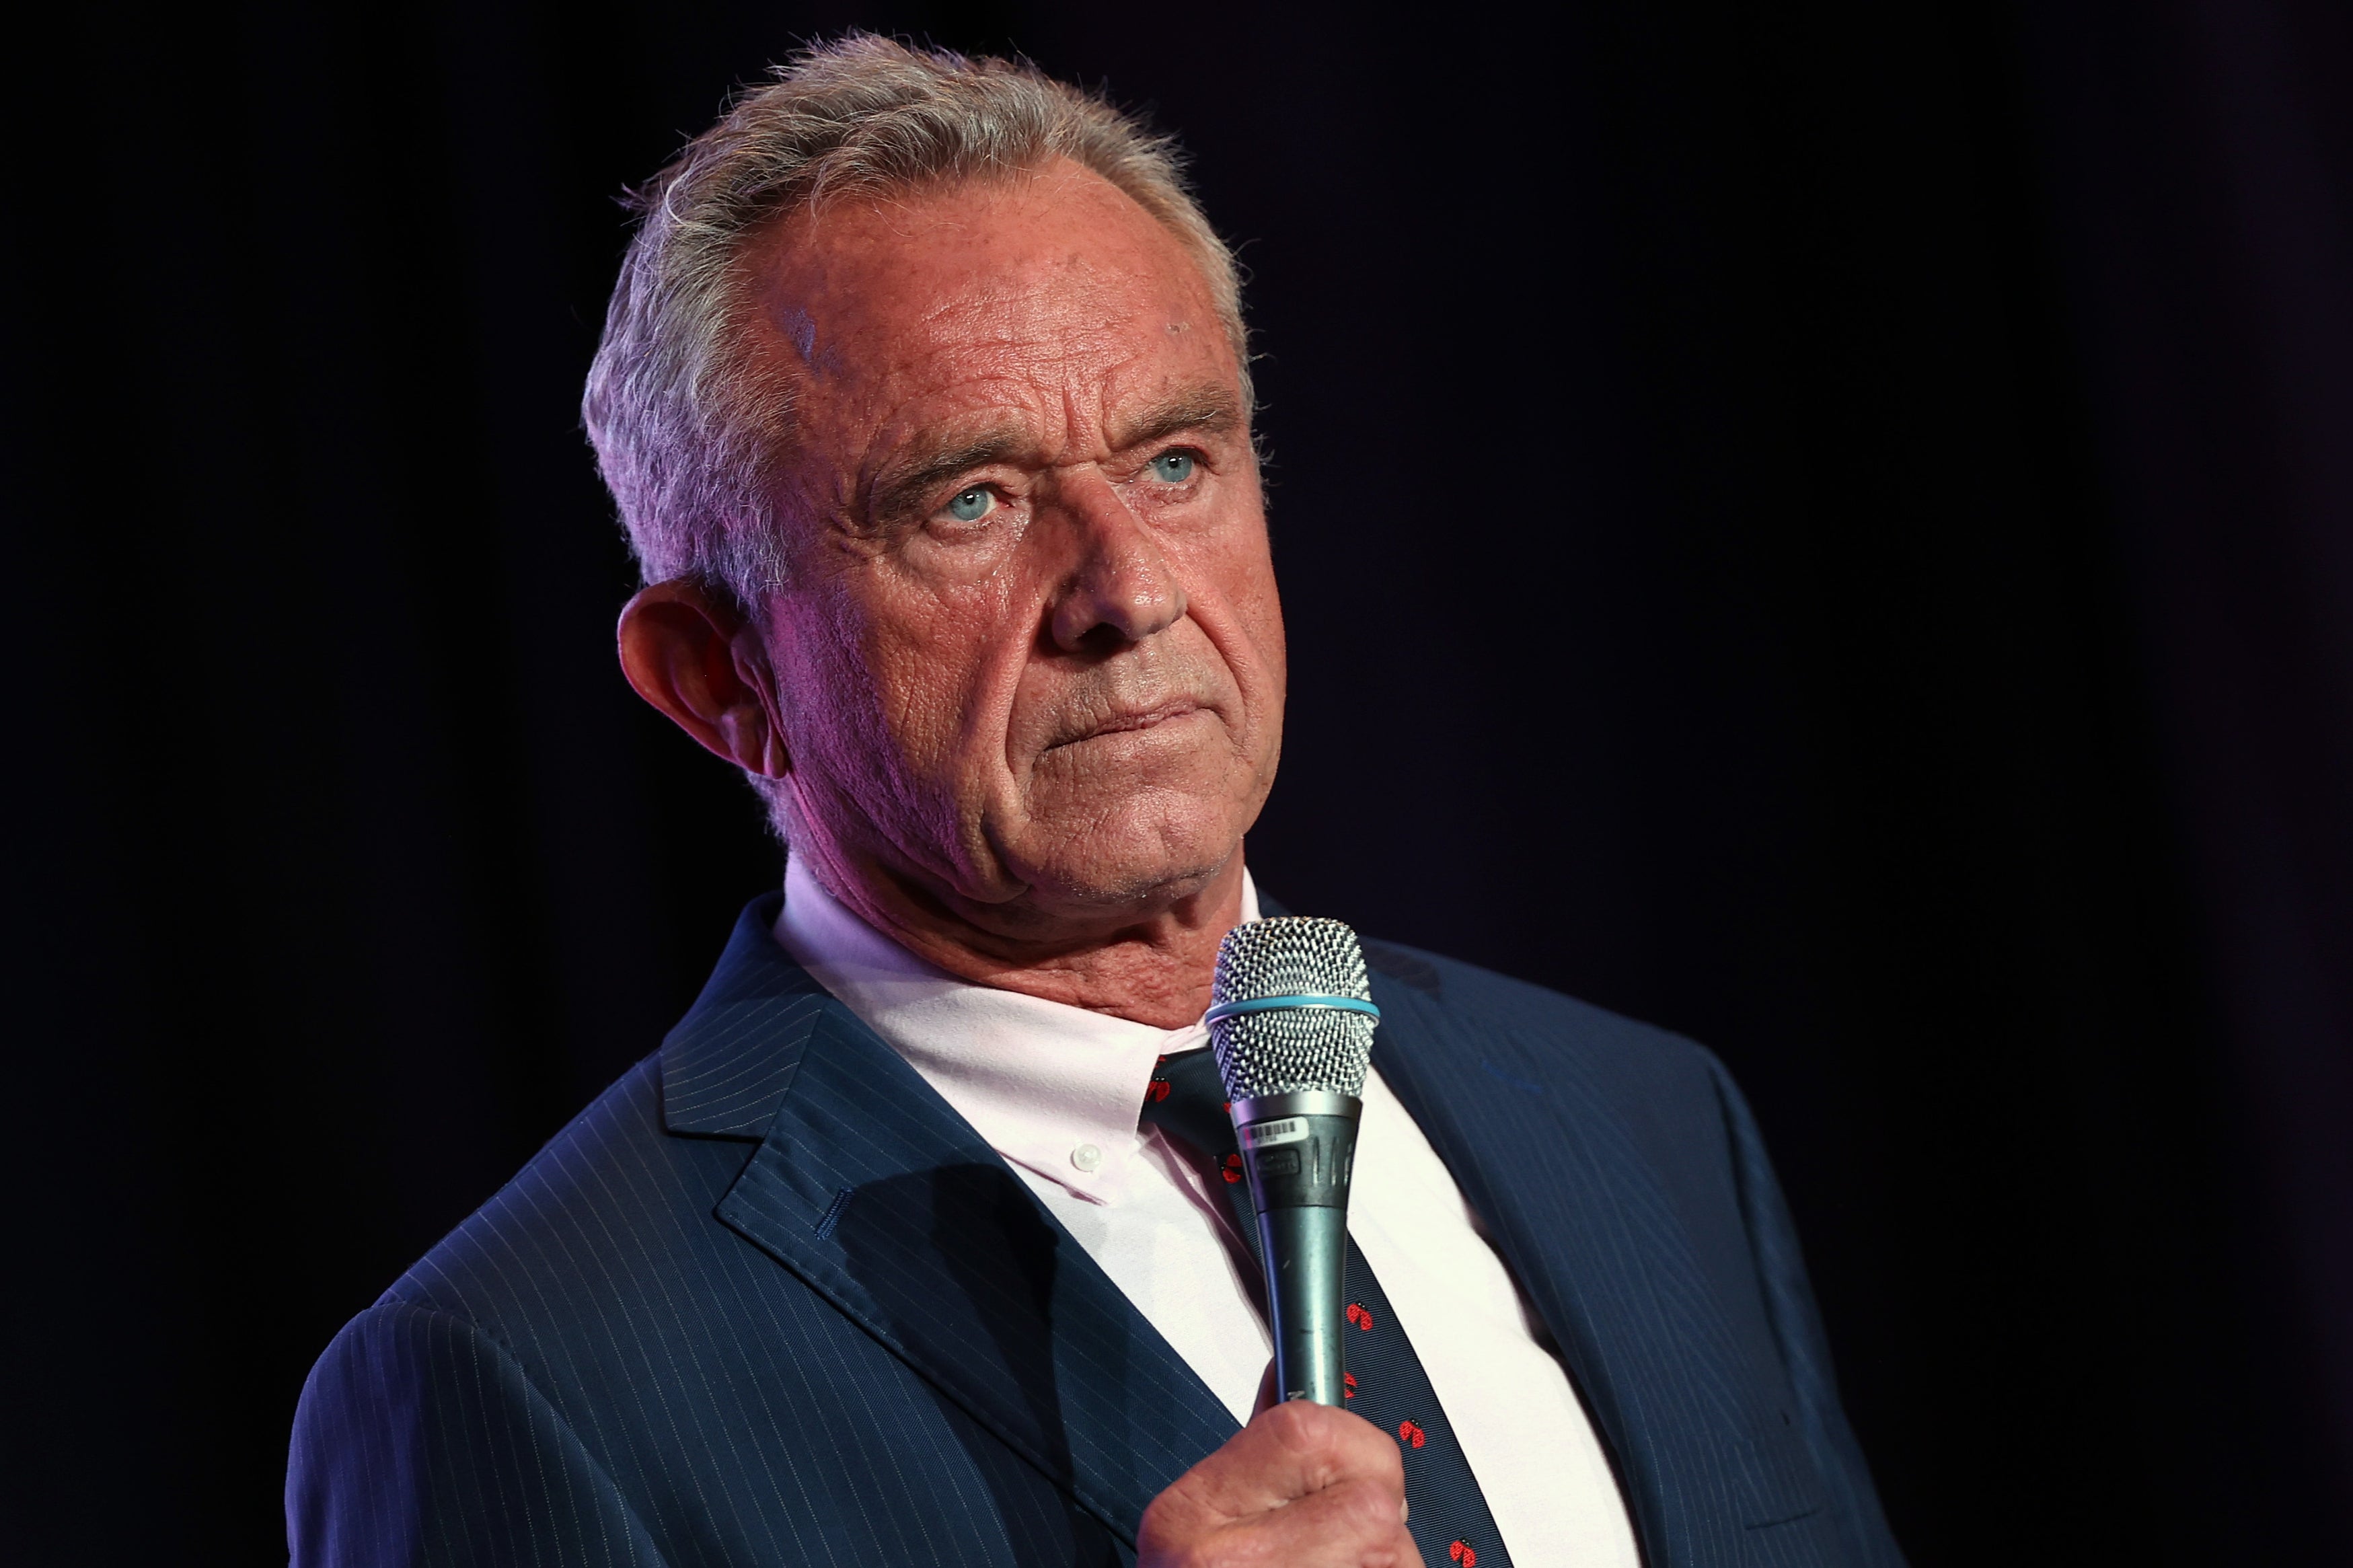 RFK Jr allegedly texted the women who accused him of sexual assault days after the accusations were launched